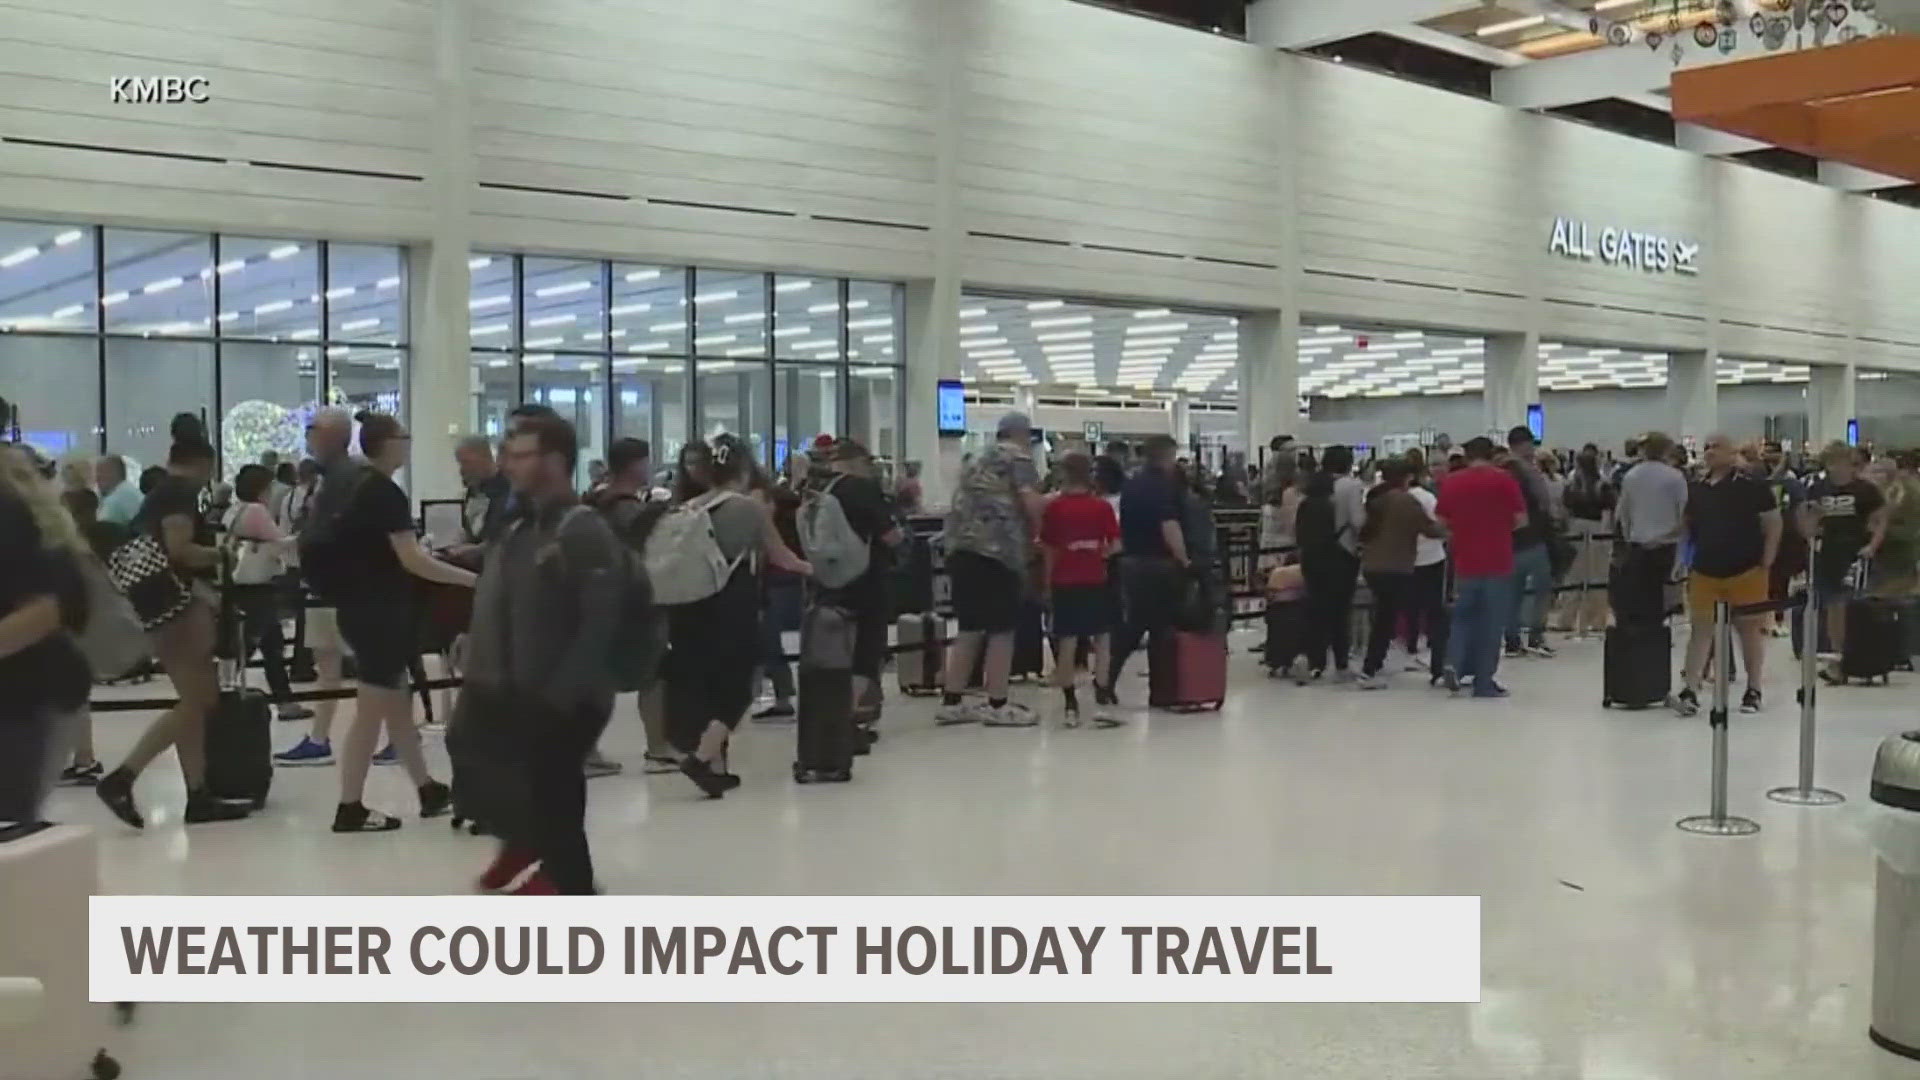 Both roads and planes will be crowded for the holiday as airlines and AAA predict.